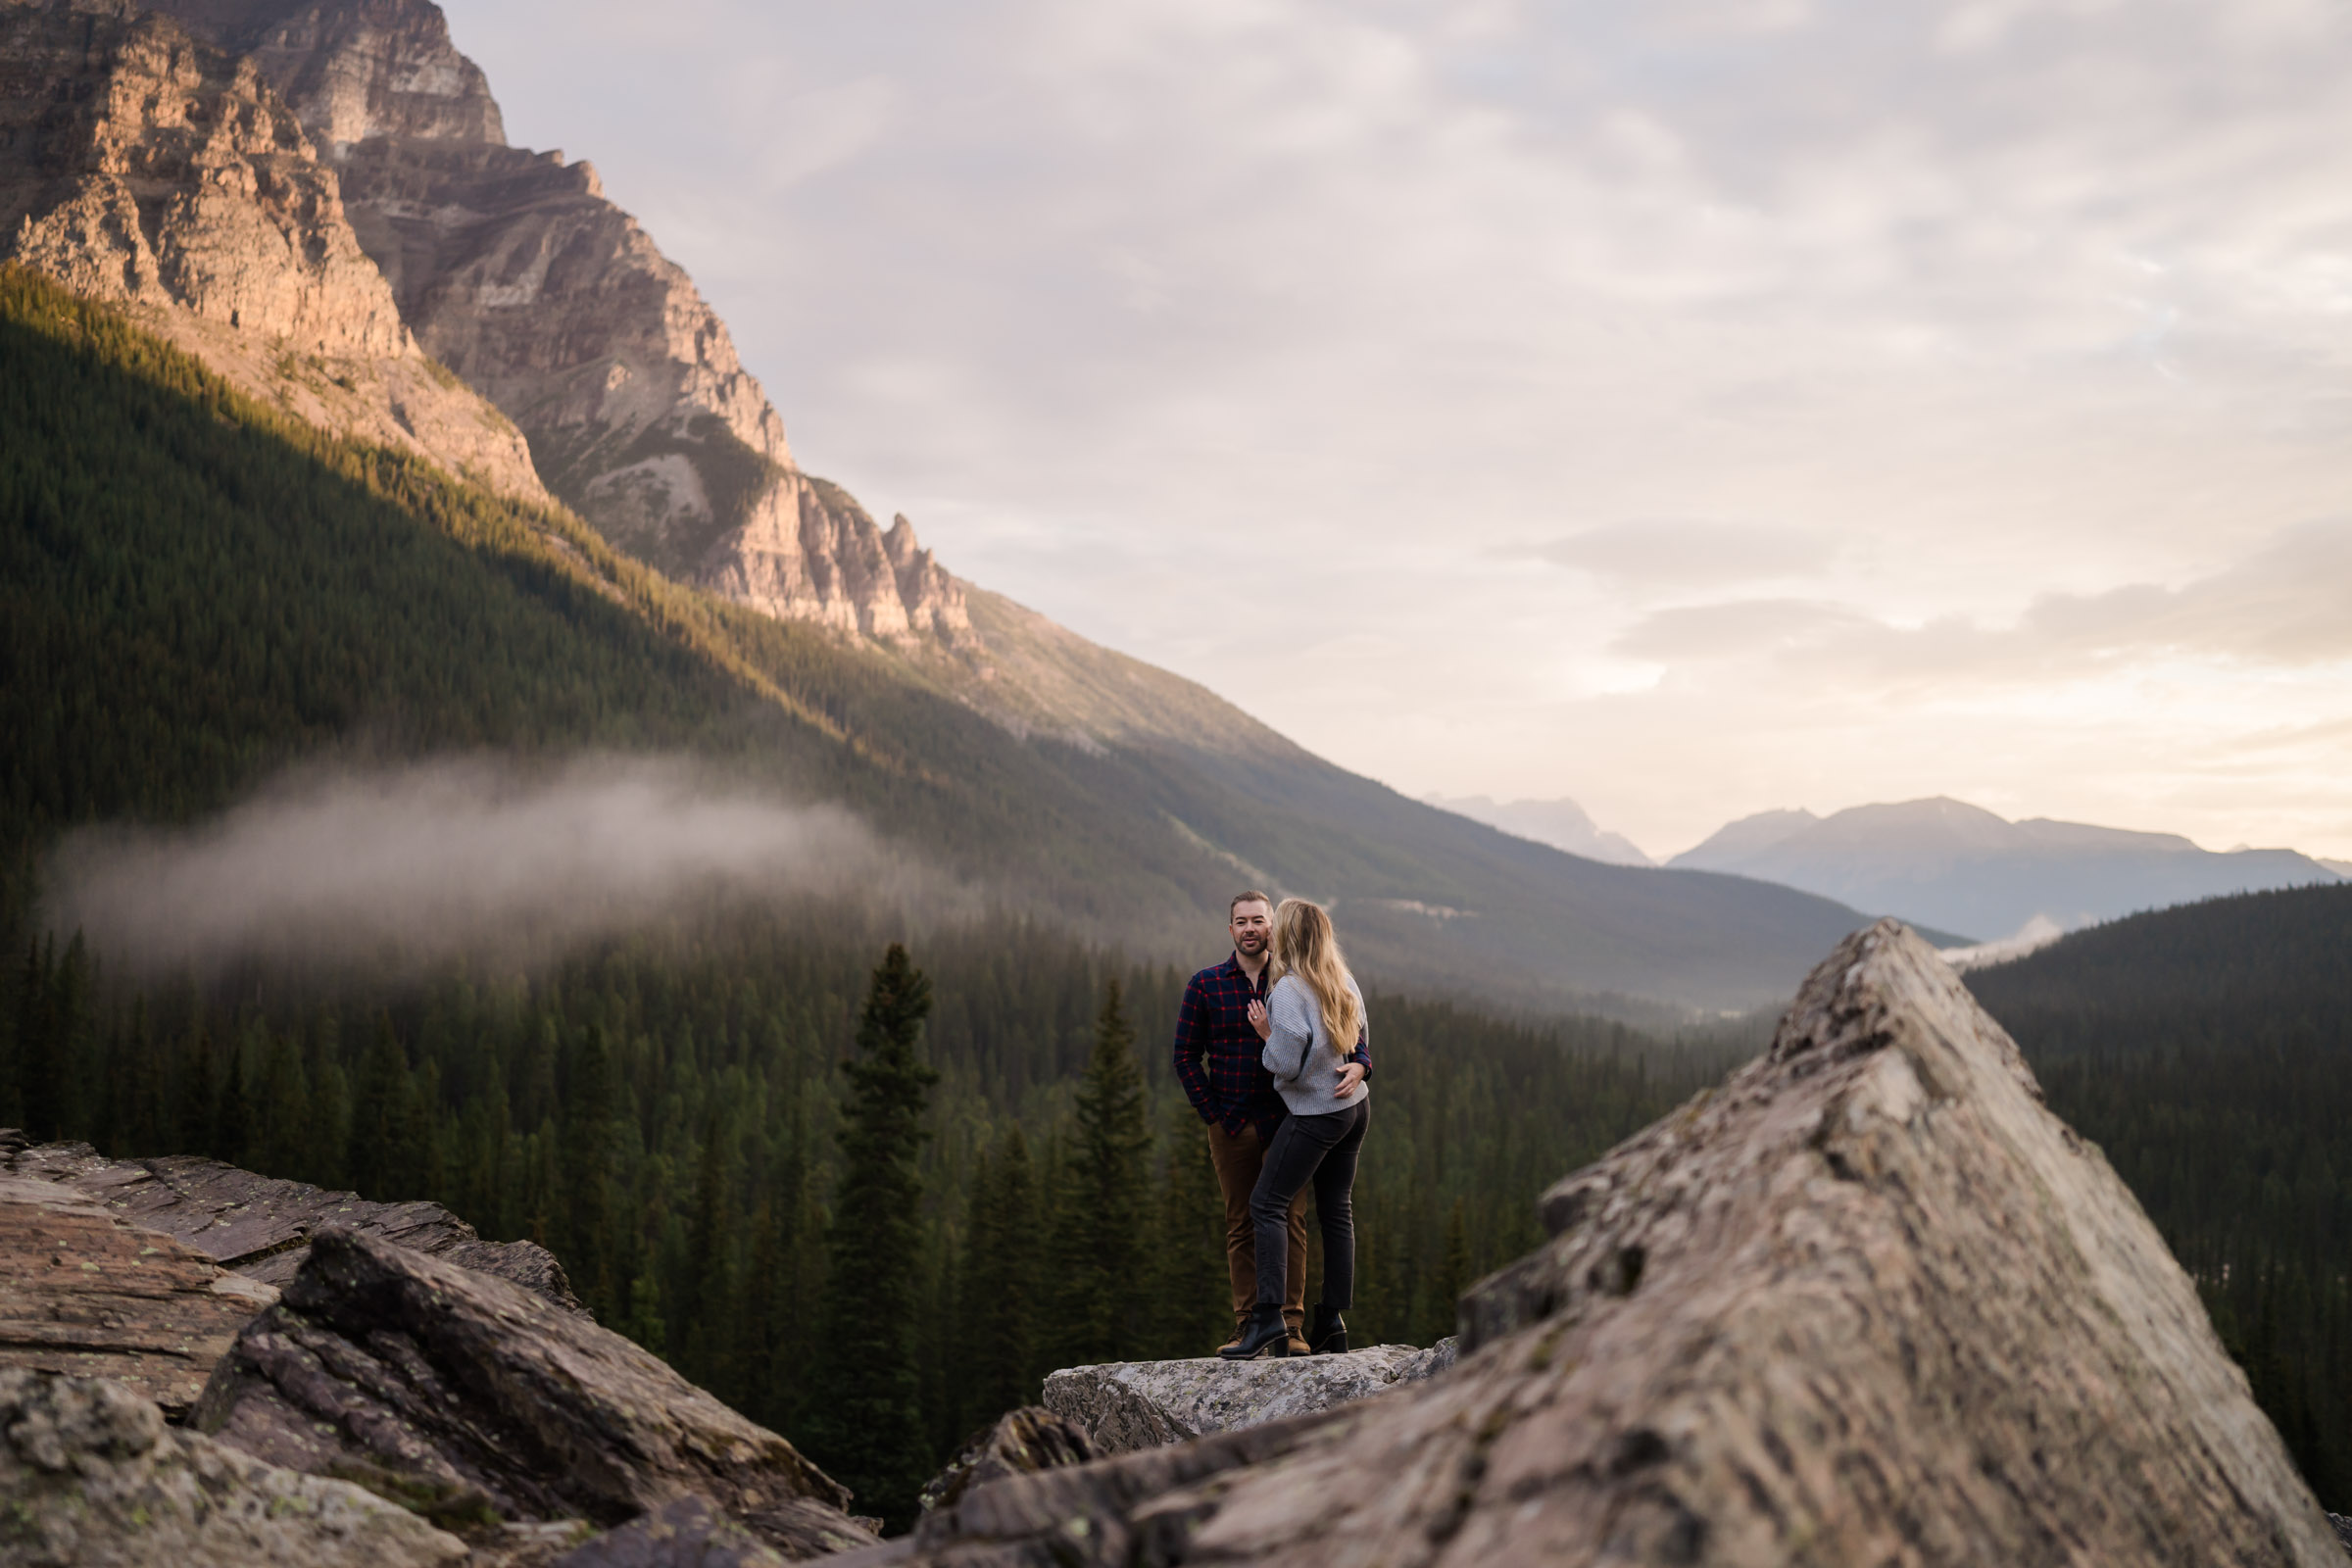 Fog floats over the valley as the sun lights up the mountains behind as a couple snuggles in Banff.